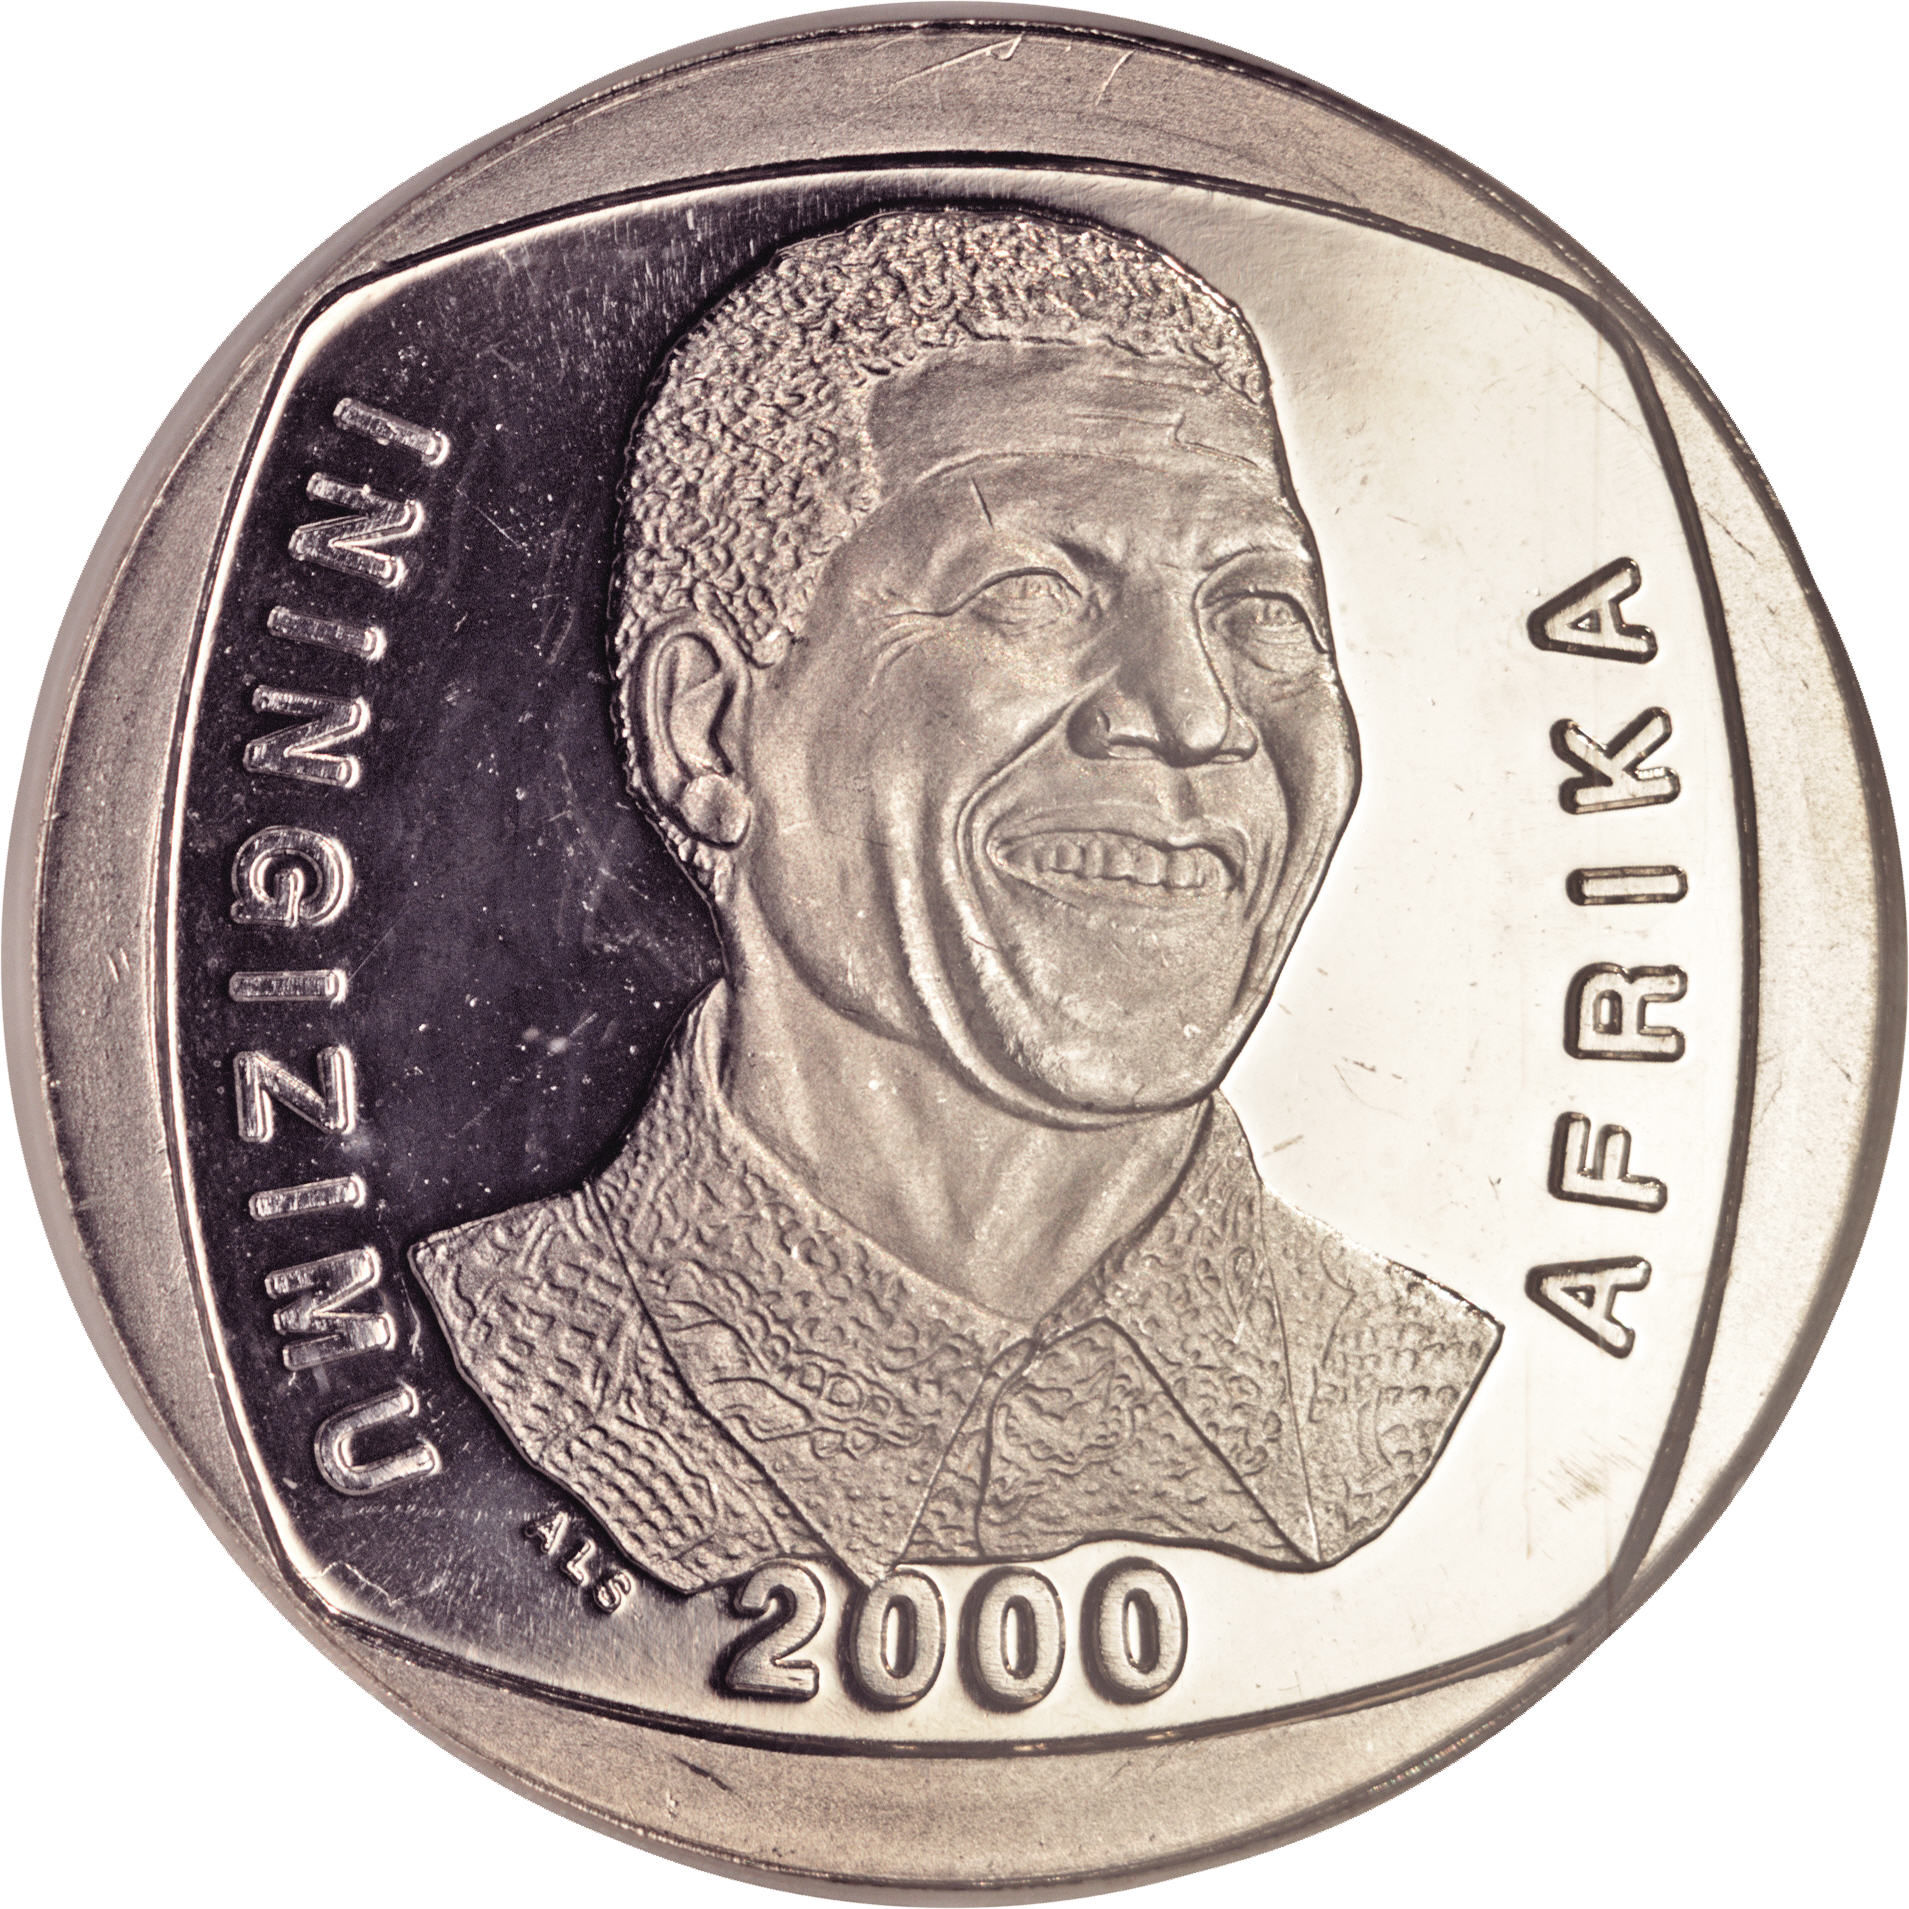 South Africa issuing Nelson Mandela 5-rand coin in July